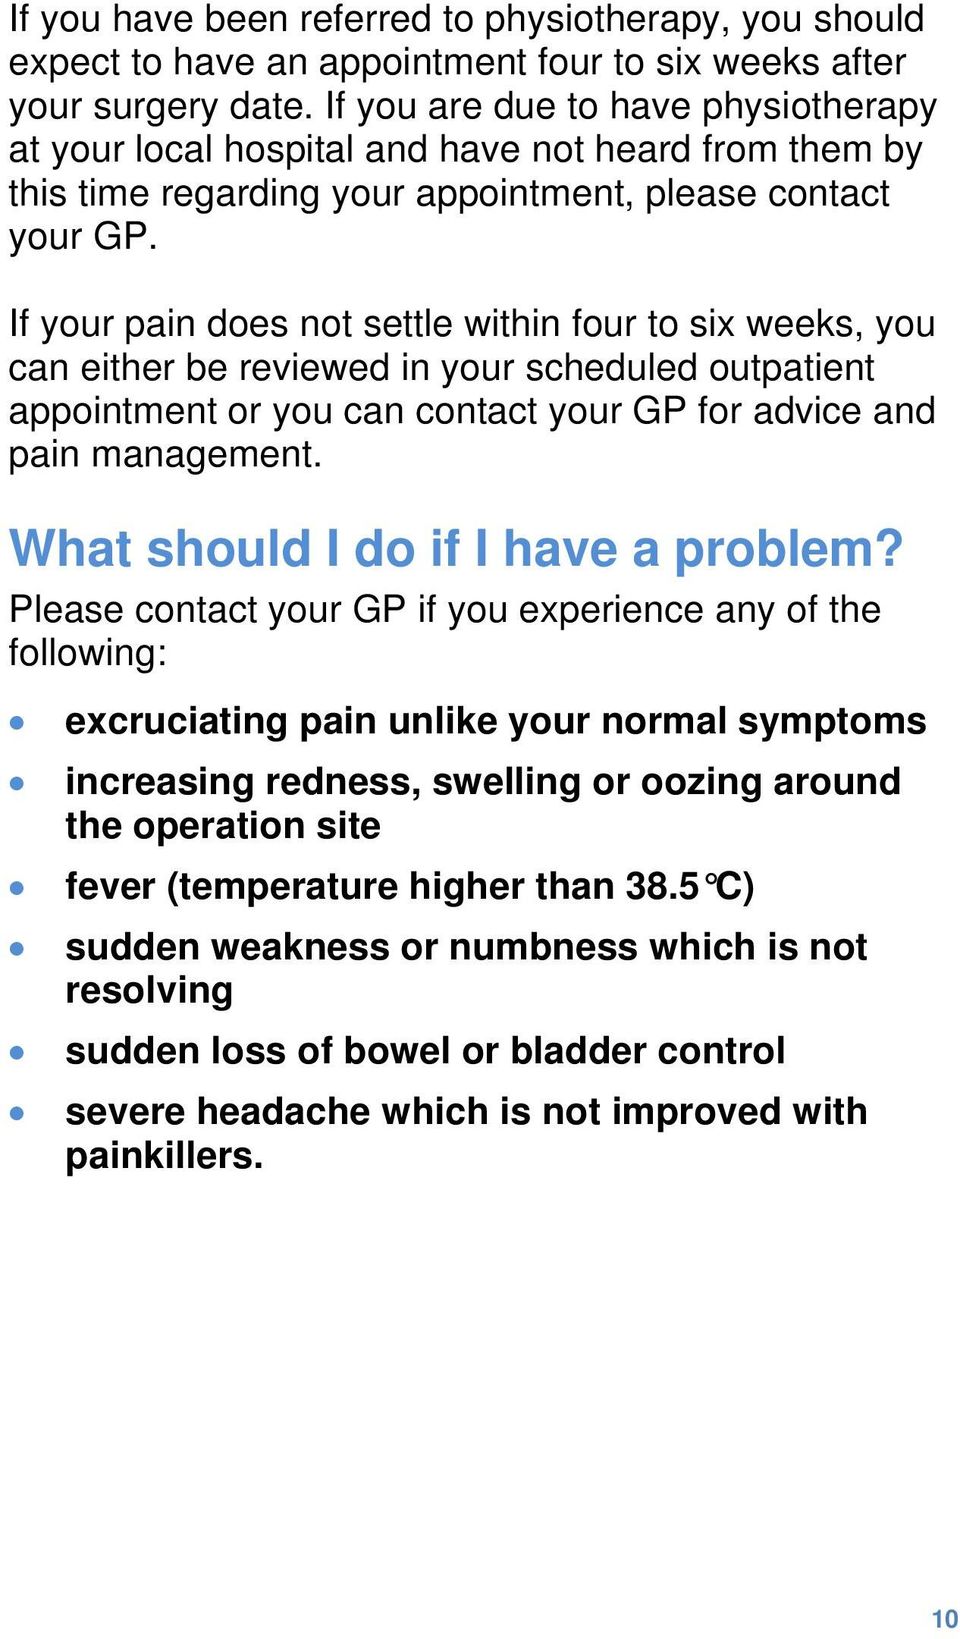 If your pain does not settle within four to six weeks, you can either be reviewed in your scheduled outpatient appointment or you can contact your GP for advice and pain management.